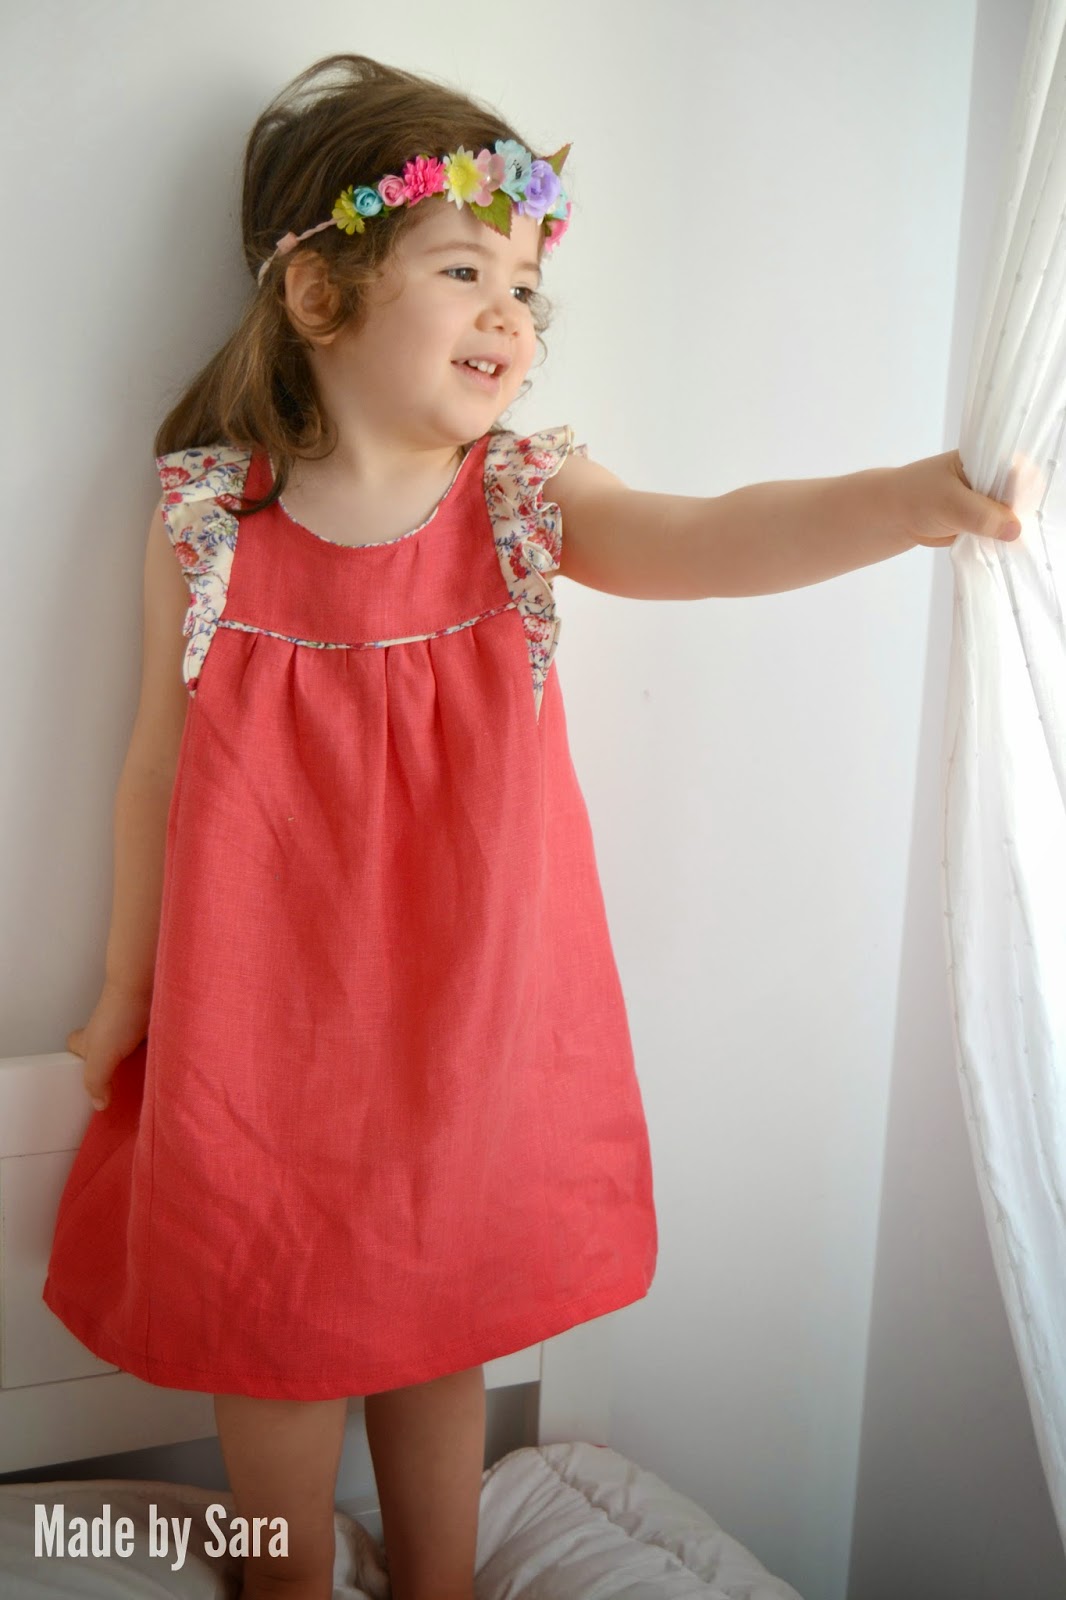 A birthday dress for sweet little R - Made by Sara